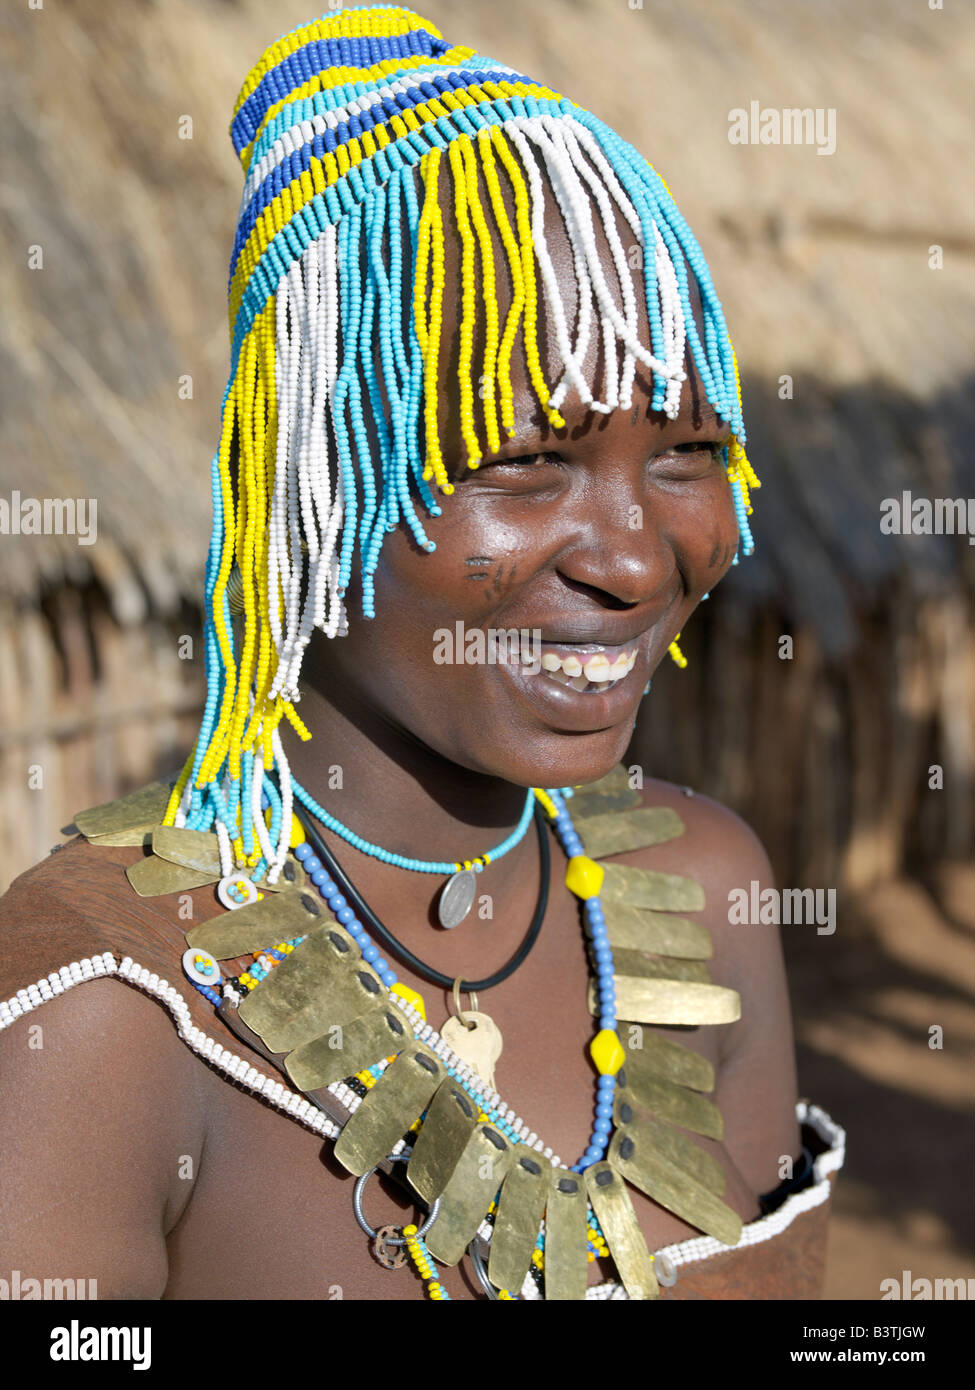 Tanzania, Northern Tanzania, Balangida Lelu. A Datoga woman with a beaded hat worn on ceremonial occasions. The traditional attire of Datoga women includes beautifully tanned and decorated leather dresses and coiled brass armbands and necklaces. Yellow and light blue are the preferred colours of the beads they wear. Scarification of the face is not uncommon among women and girls.The Datoga (known to their Maasai neighbours as the Mang'ati and to the Iraqw as Babaraig) live in northern Tanzania and are primarily pastoralists. Stock Photo